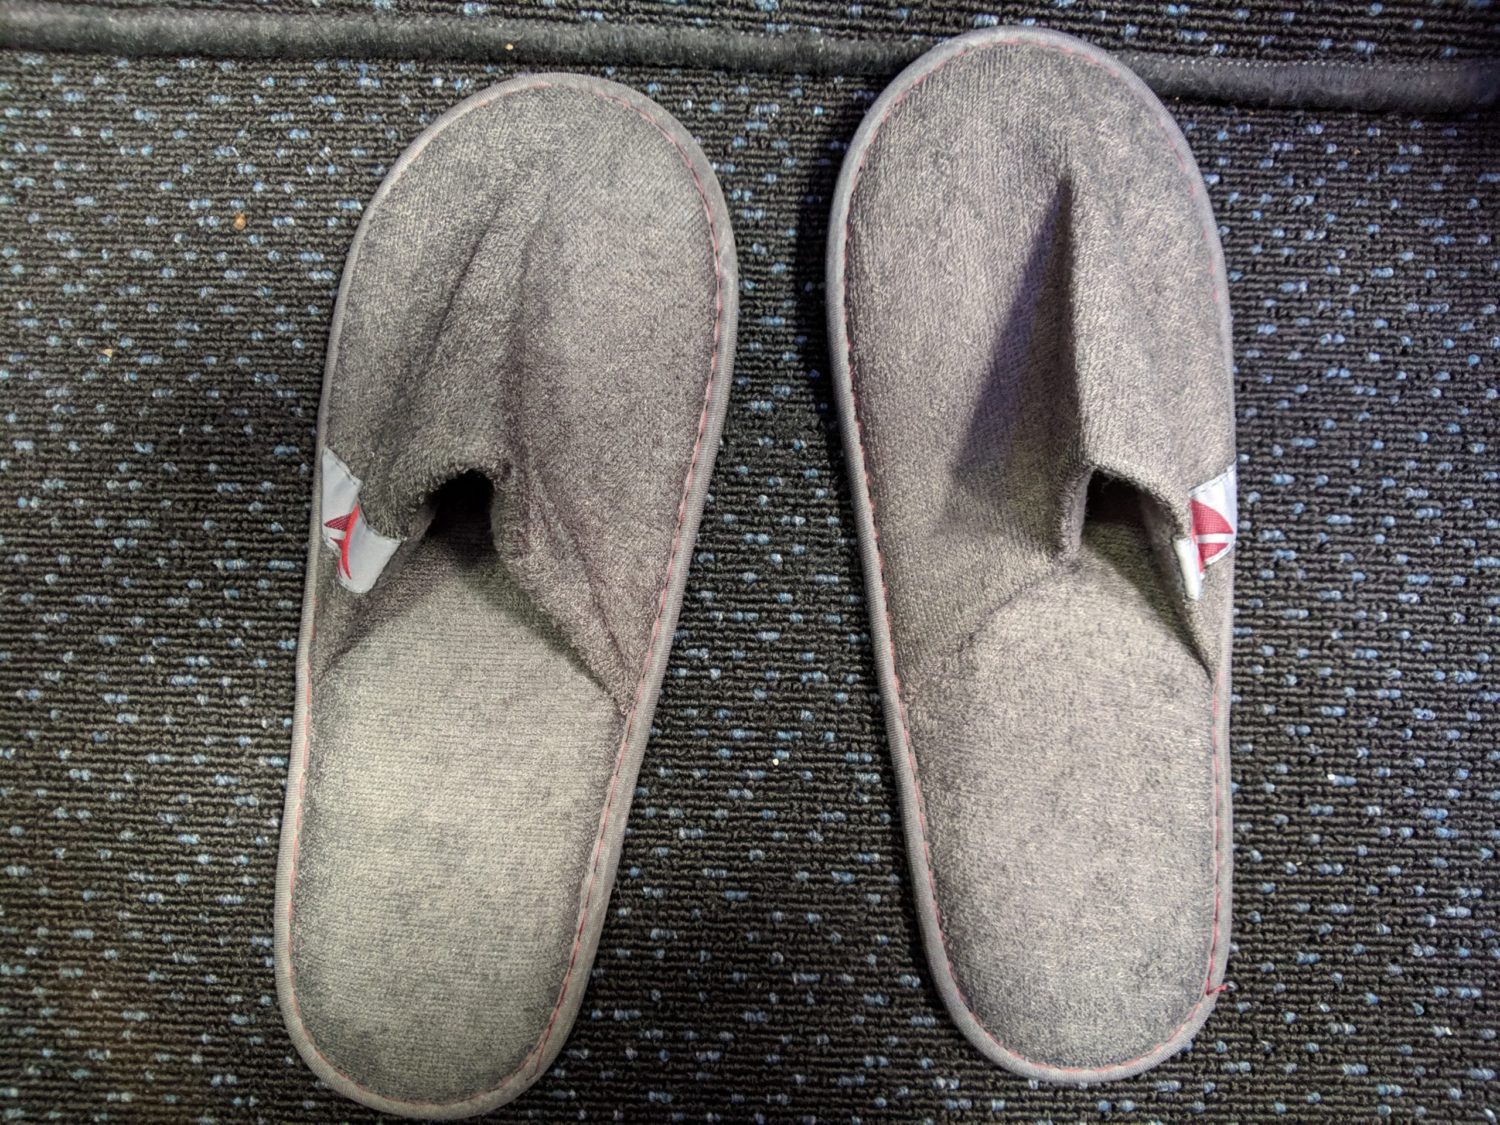 Delta One suites slippers